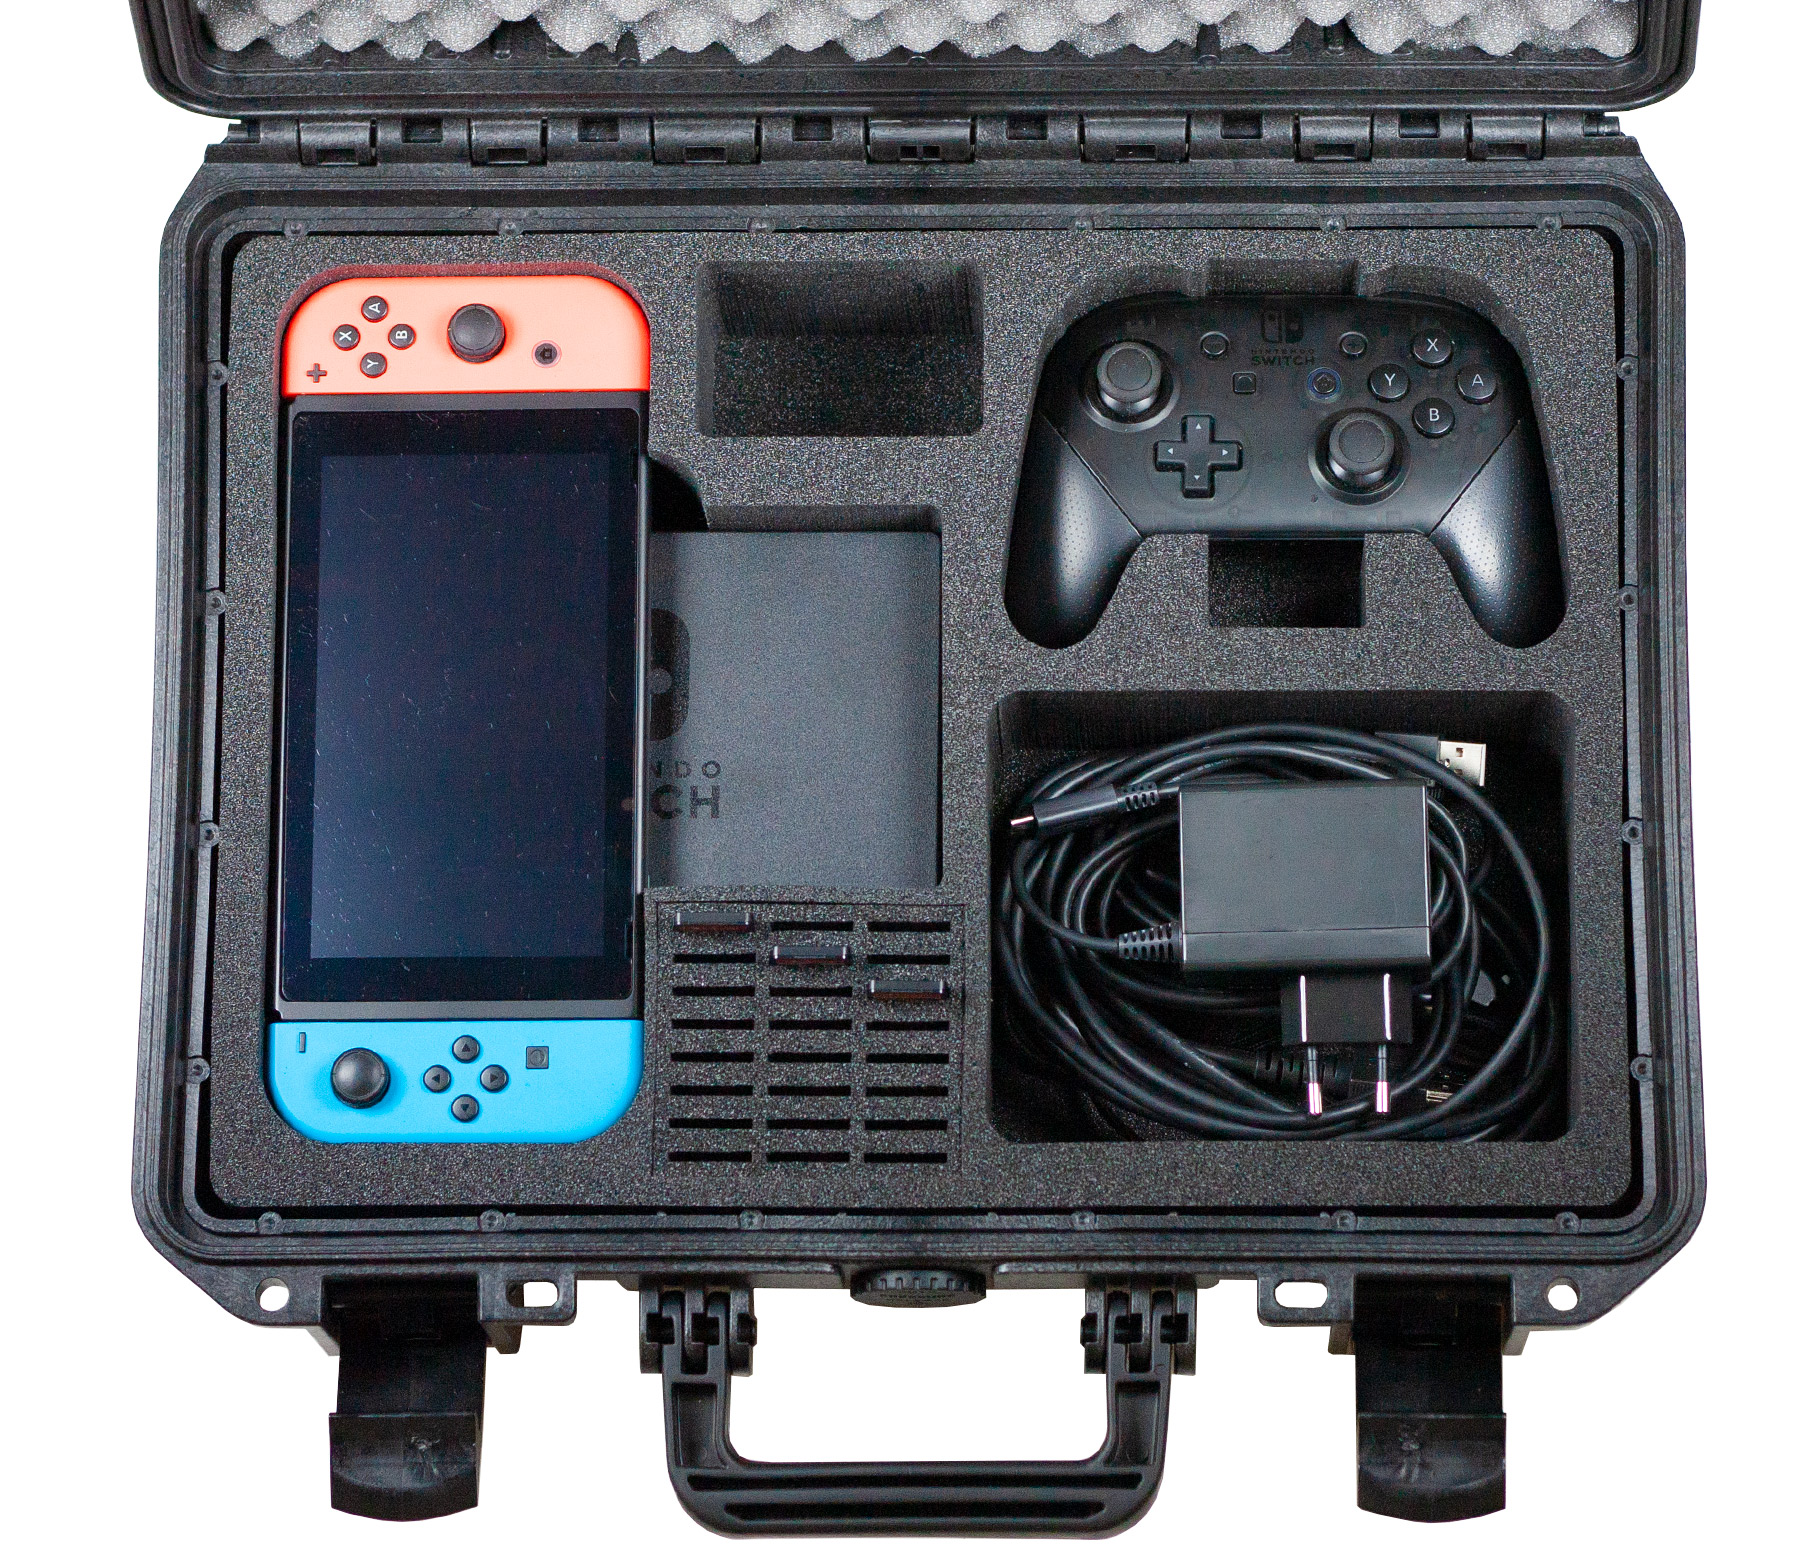 rugged travel case for your Nintendo Switch. 24 games and Pro-Controller.